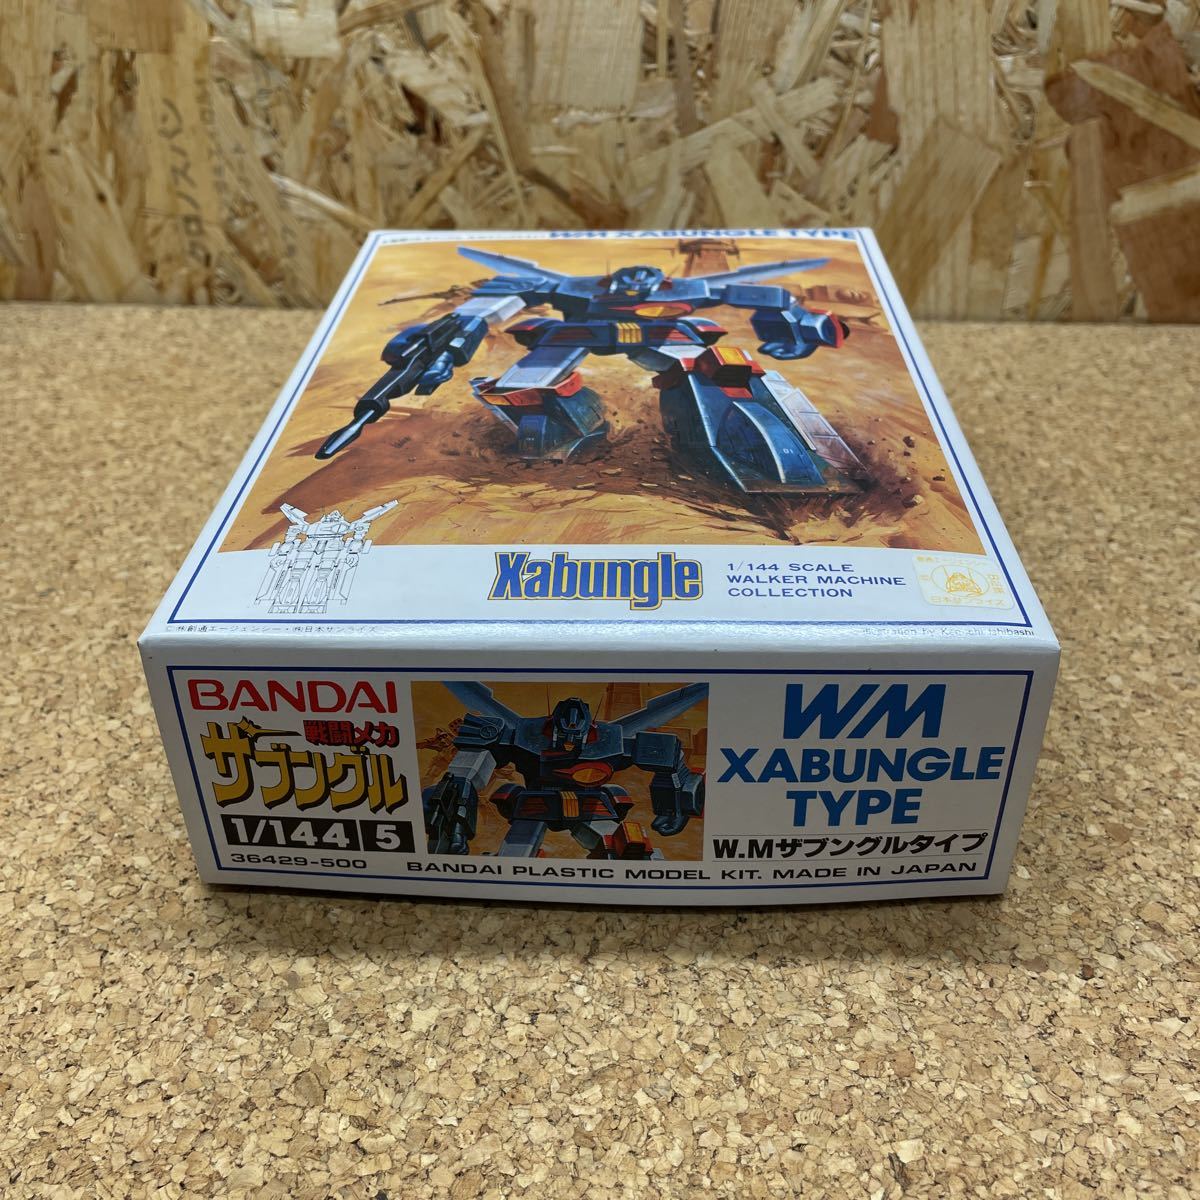 69 Bandai Blue Gale Xabungle 1/144 The bngru type instructions lack of not yet constructed including in a package un- possible outside fixed form shipping 